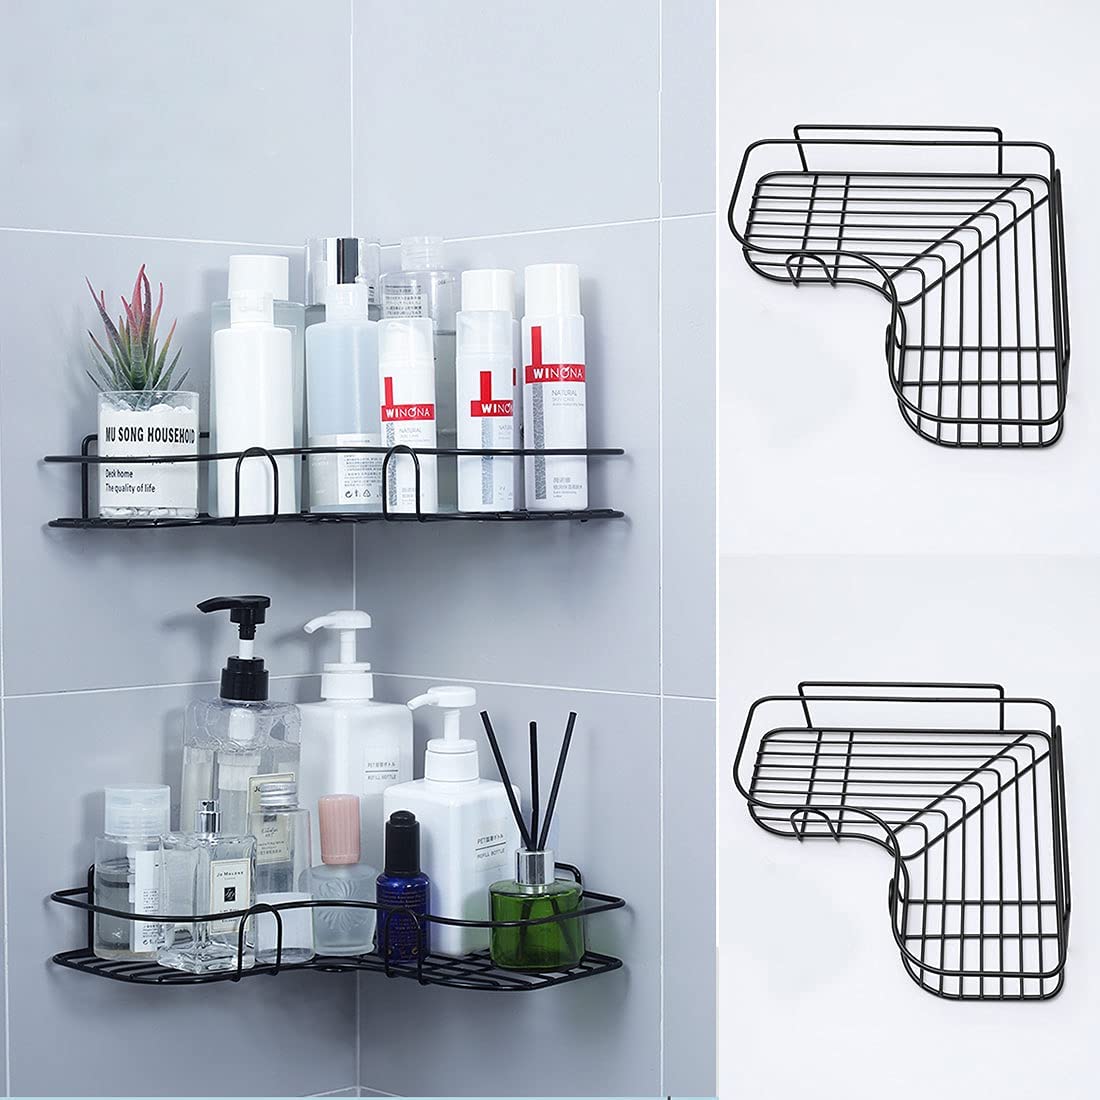 SKY-TOUCH 2PCS Corner Shower Shelves，Self Adhesive No Drilling Wall Mounted Shower Storage Shelf Organizer for your Bathroom, Kitchen and Toilet，Stainless Steel